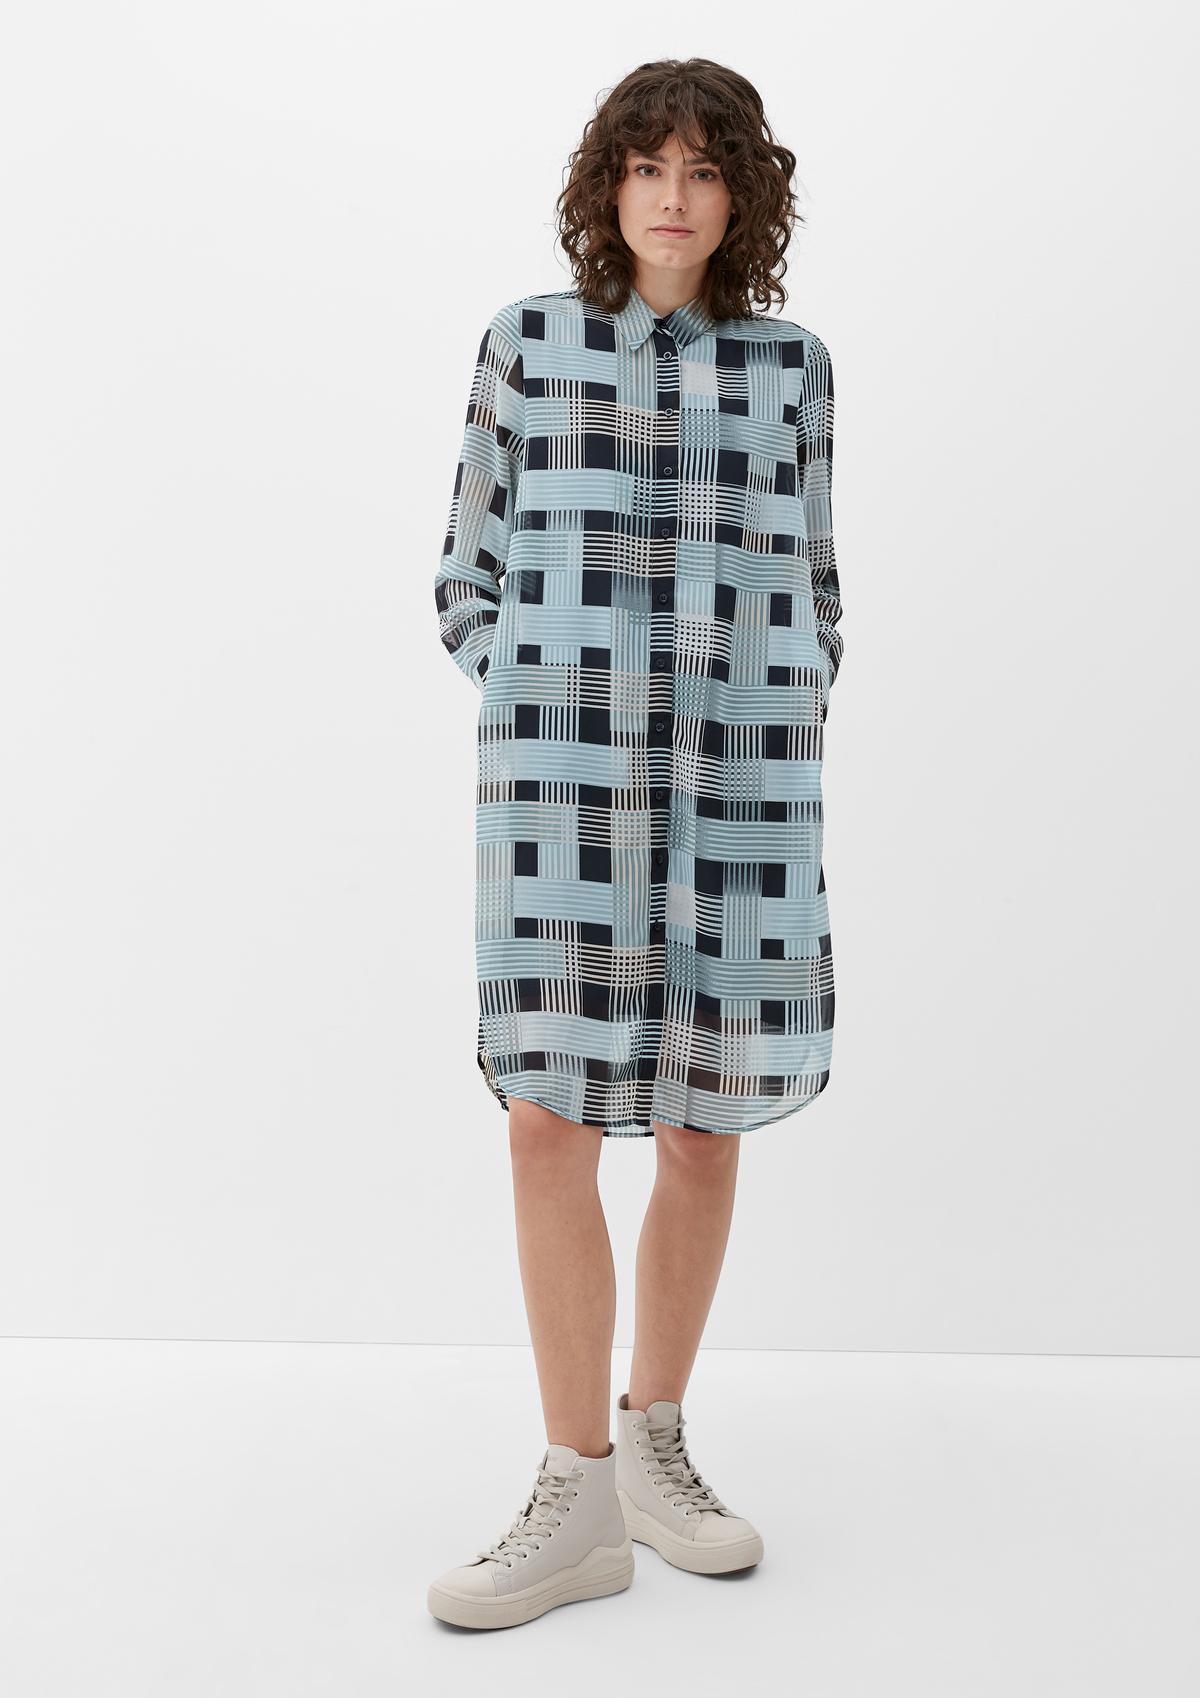 s.Oliver Checked blouse dress